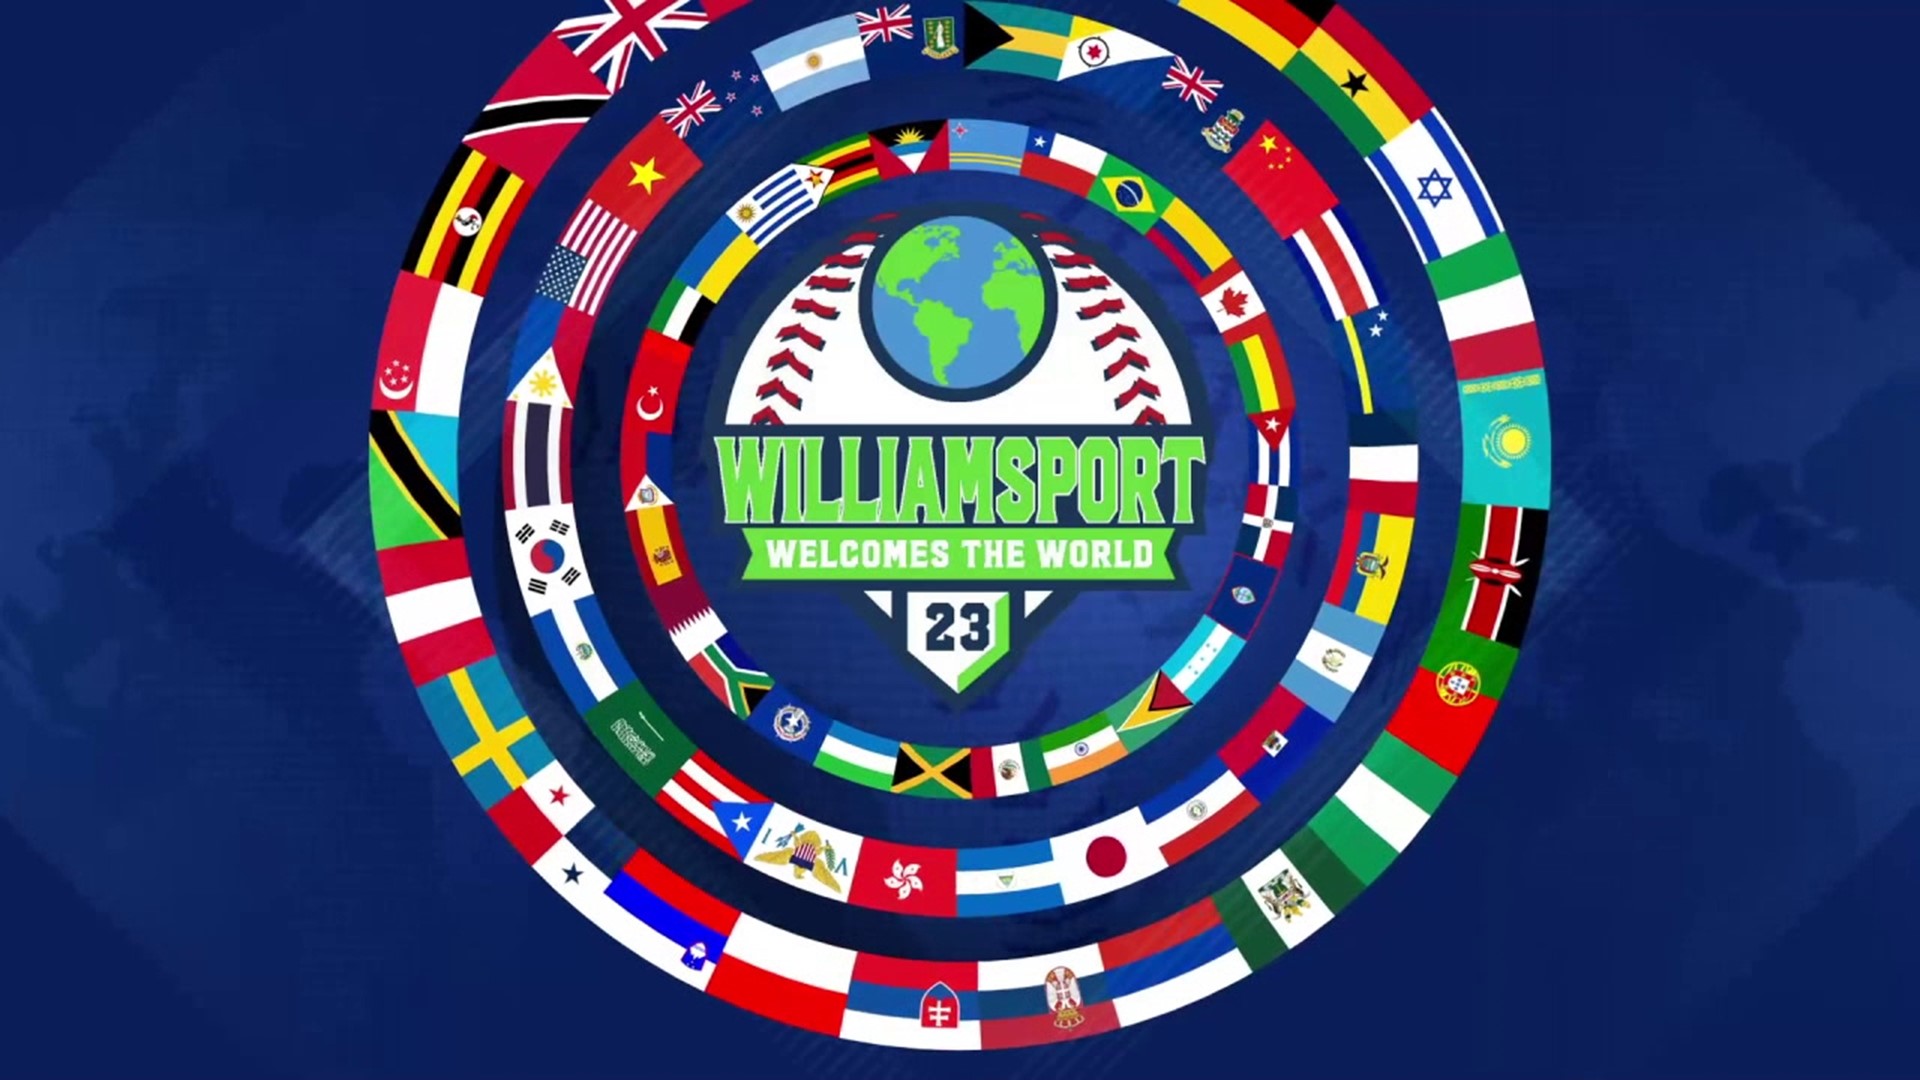 For 13 years, Williamsport Welcomes the World has brought thousands to Billtown to experience all the area has to offer.